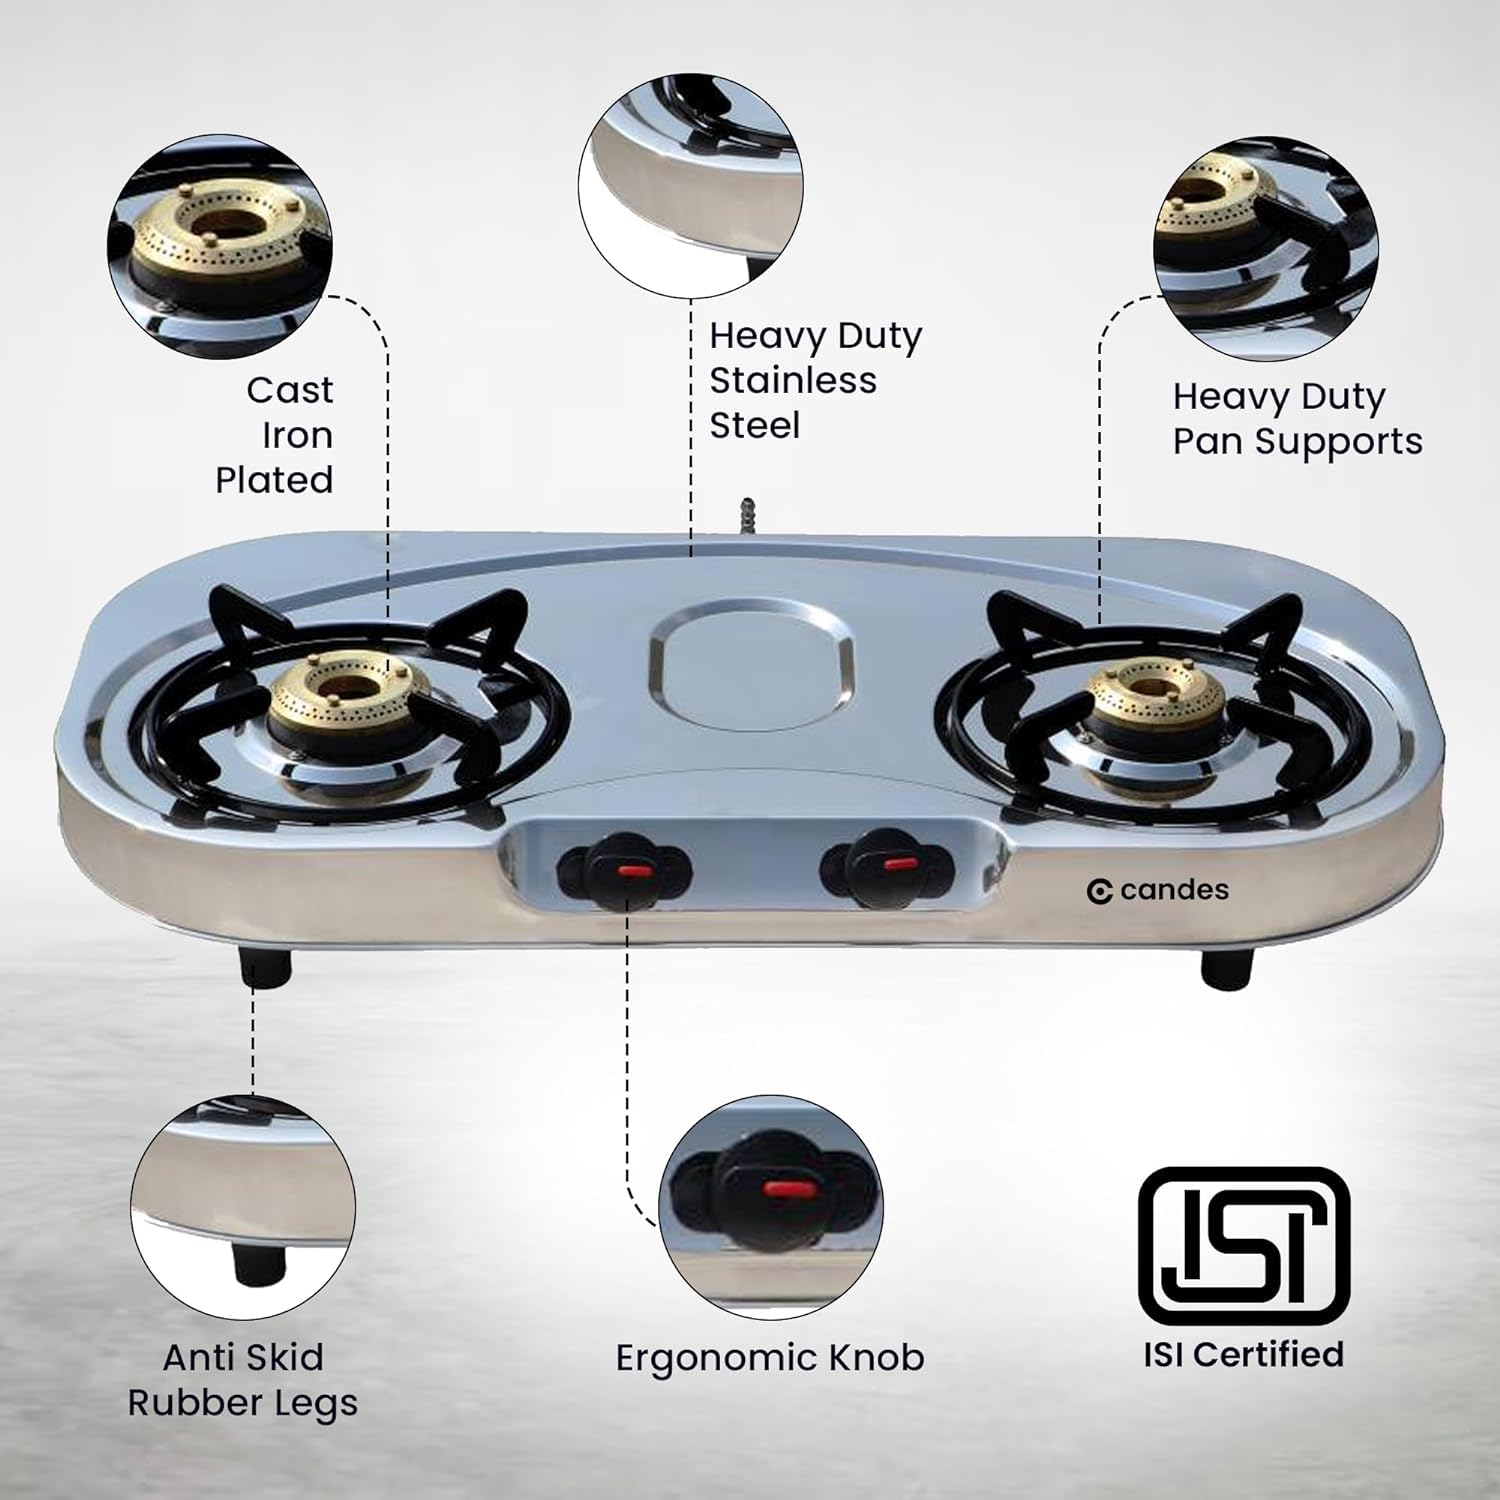 Candes Stainless Steel 2 Burner Manual Oval Gas Stove |Die Cast Alloy Tornado Burner | Gas stove 2 burners Steel |LPG Compatible |ISI Certified | Door Step Service,300 Days Warranty| Pack of 2